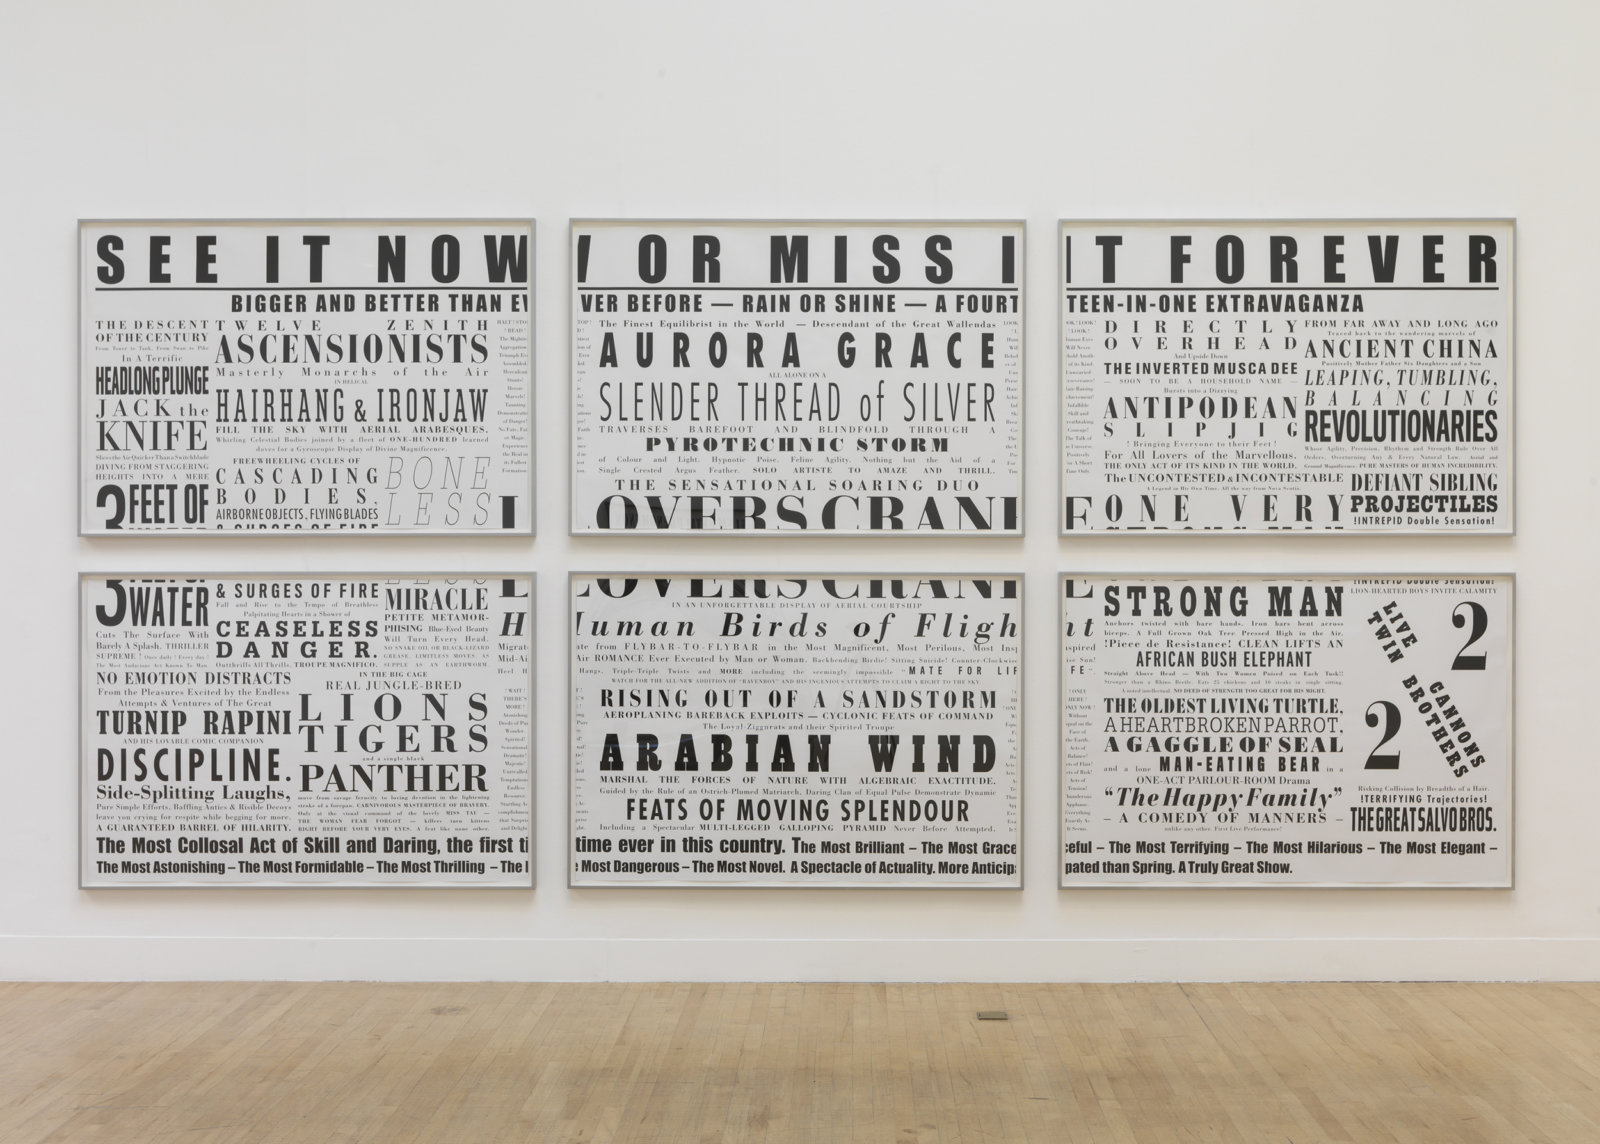 Janice Kerbel, Remarkable: Three Ring!, 2010, 6 pan­elled silkscreen prints on cam­paign poster paper, each 42 x 62 in. (107 x 158 cm). Installation view, Art Now: Janice Kerbel, Tate Britain, London, UK, 2010